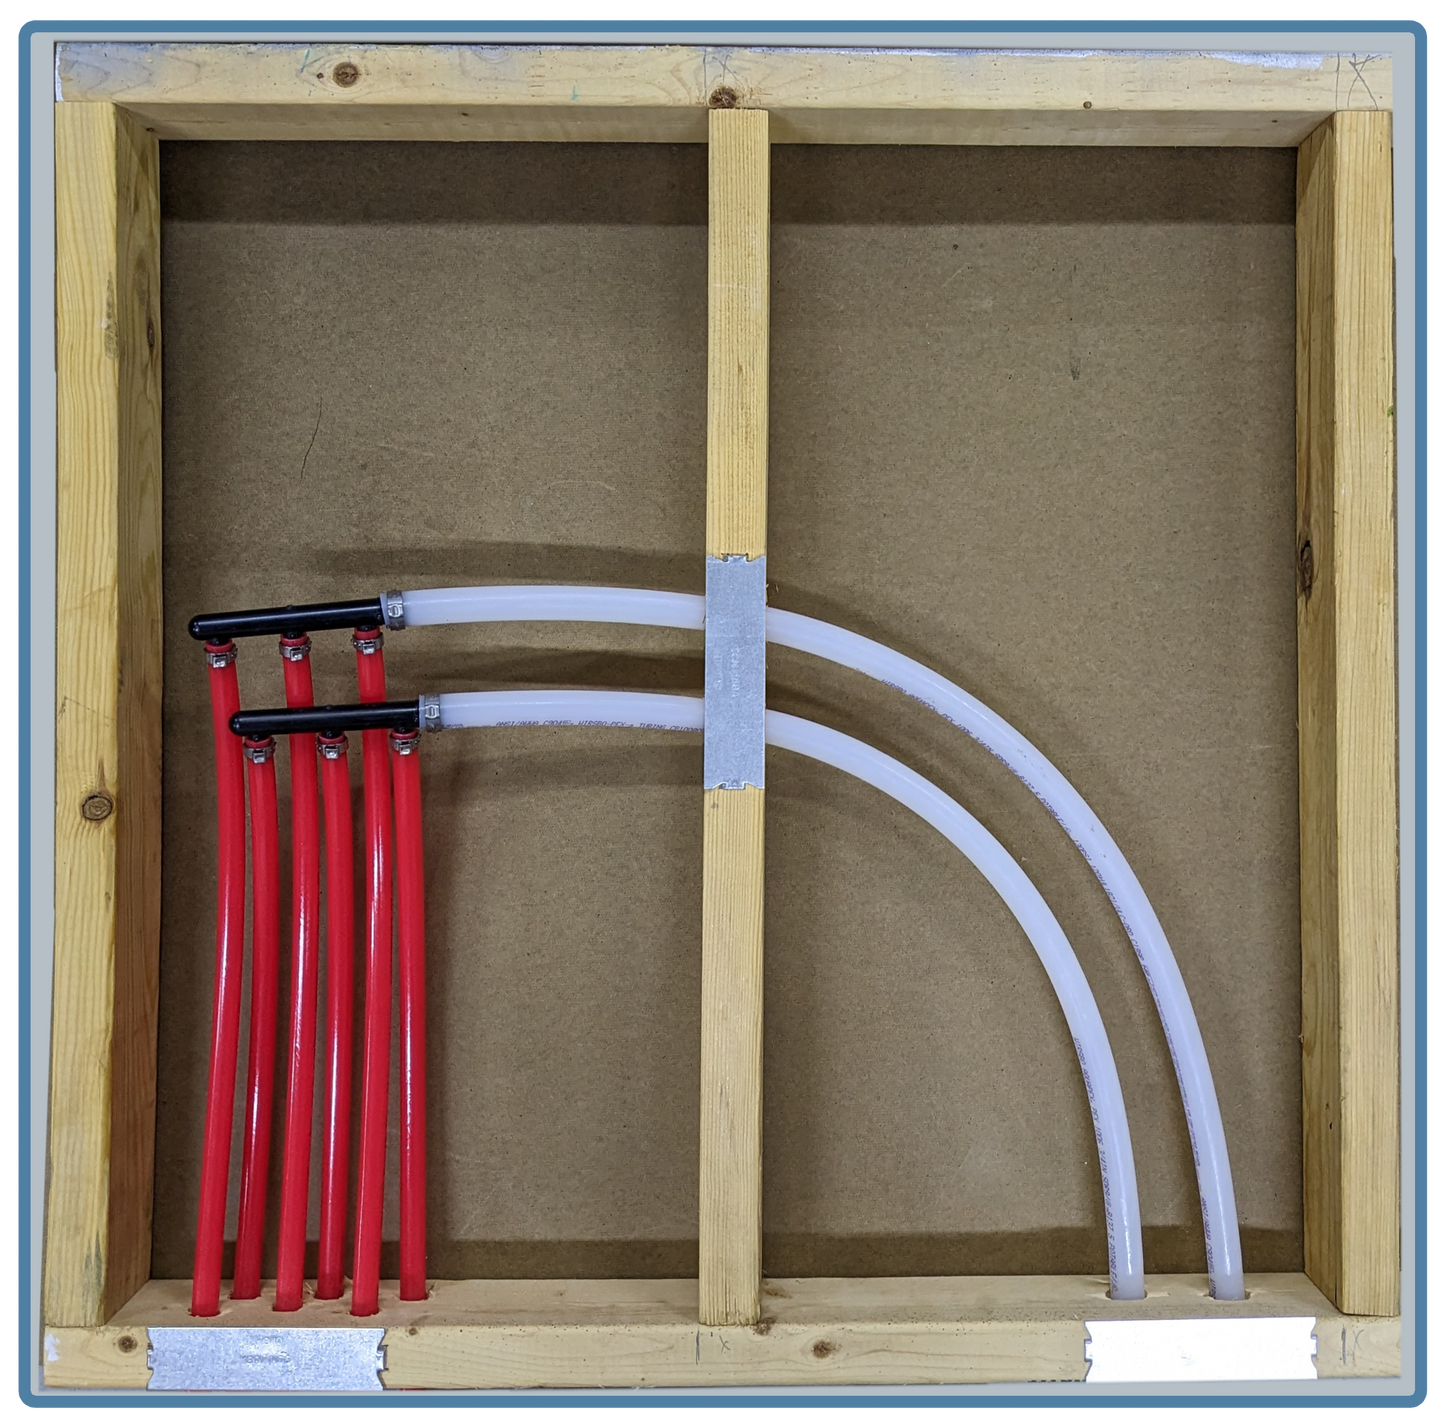 3 port ploy manifold kit in use for in floor heating